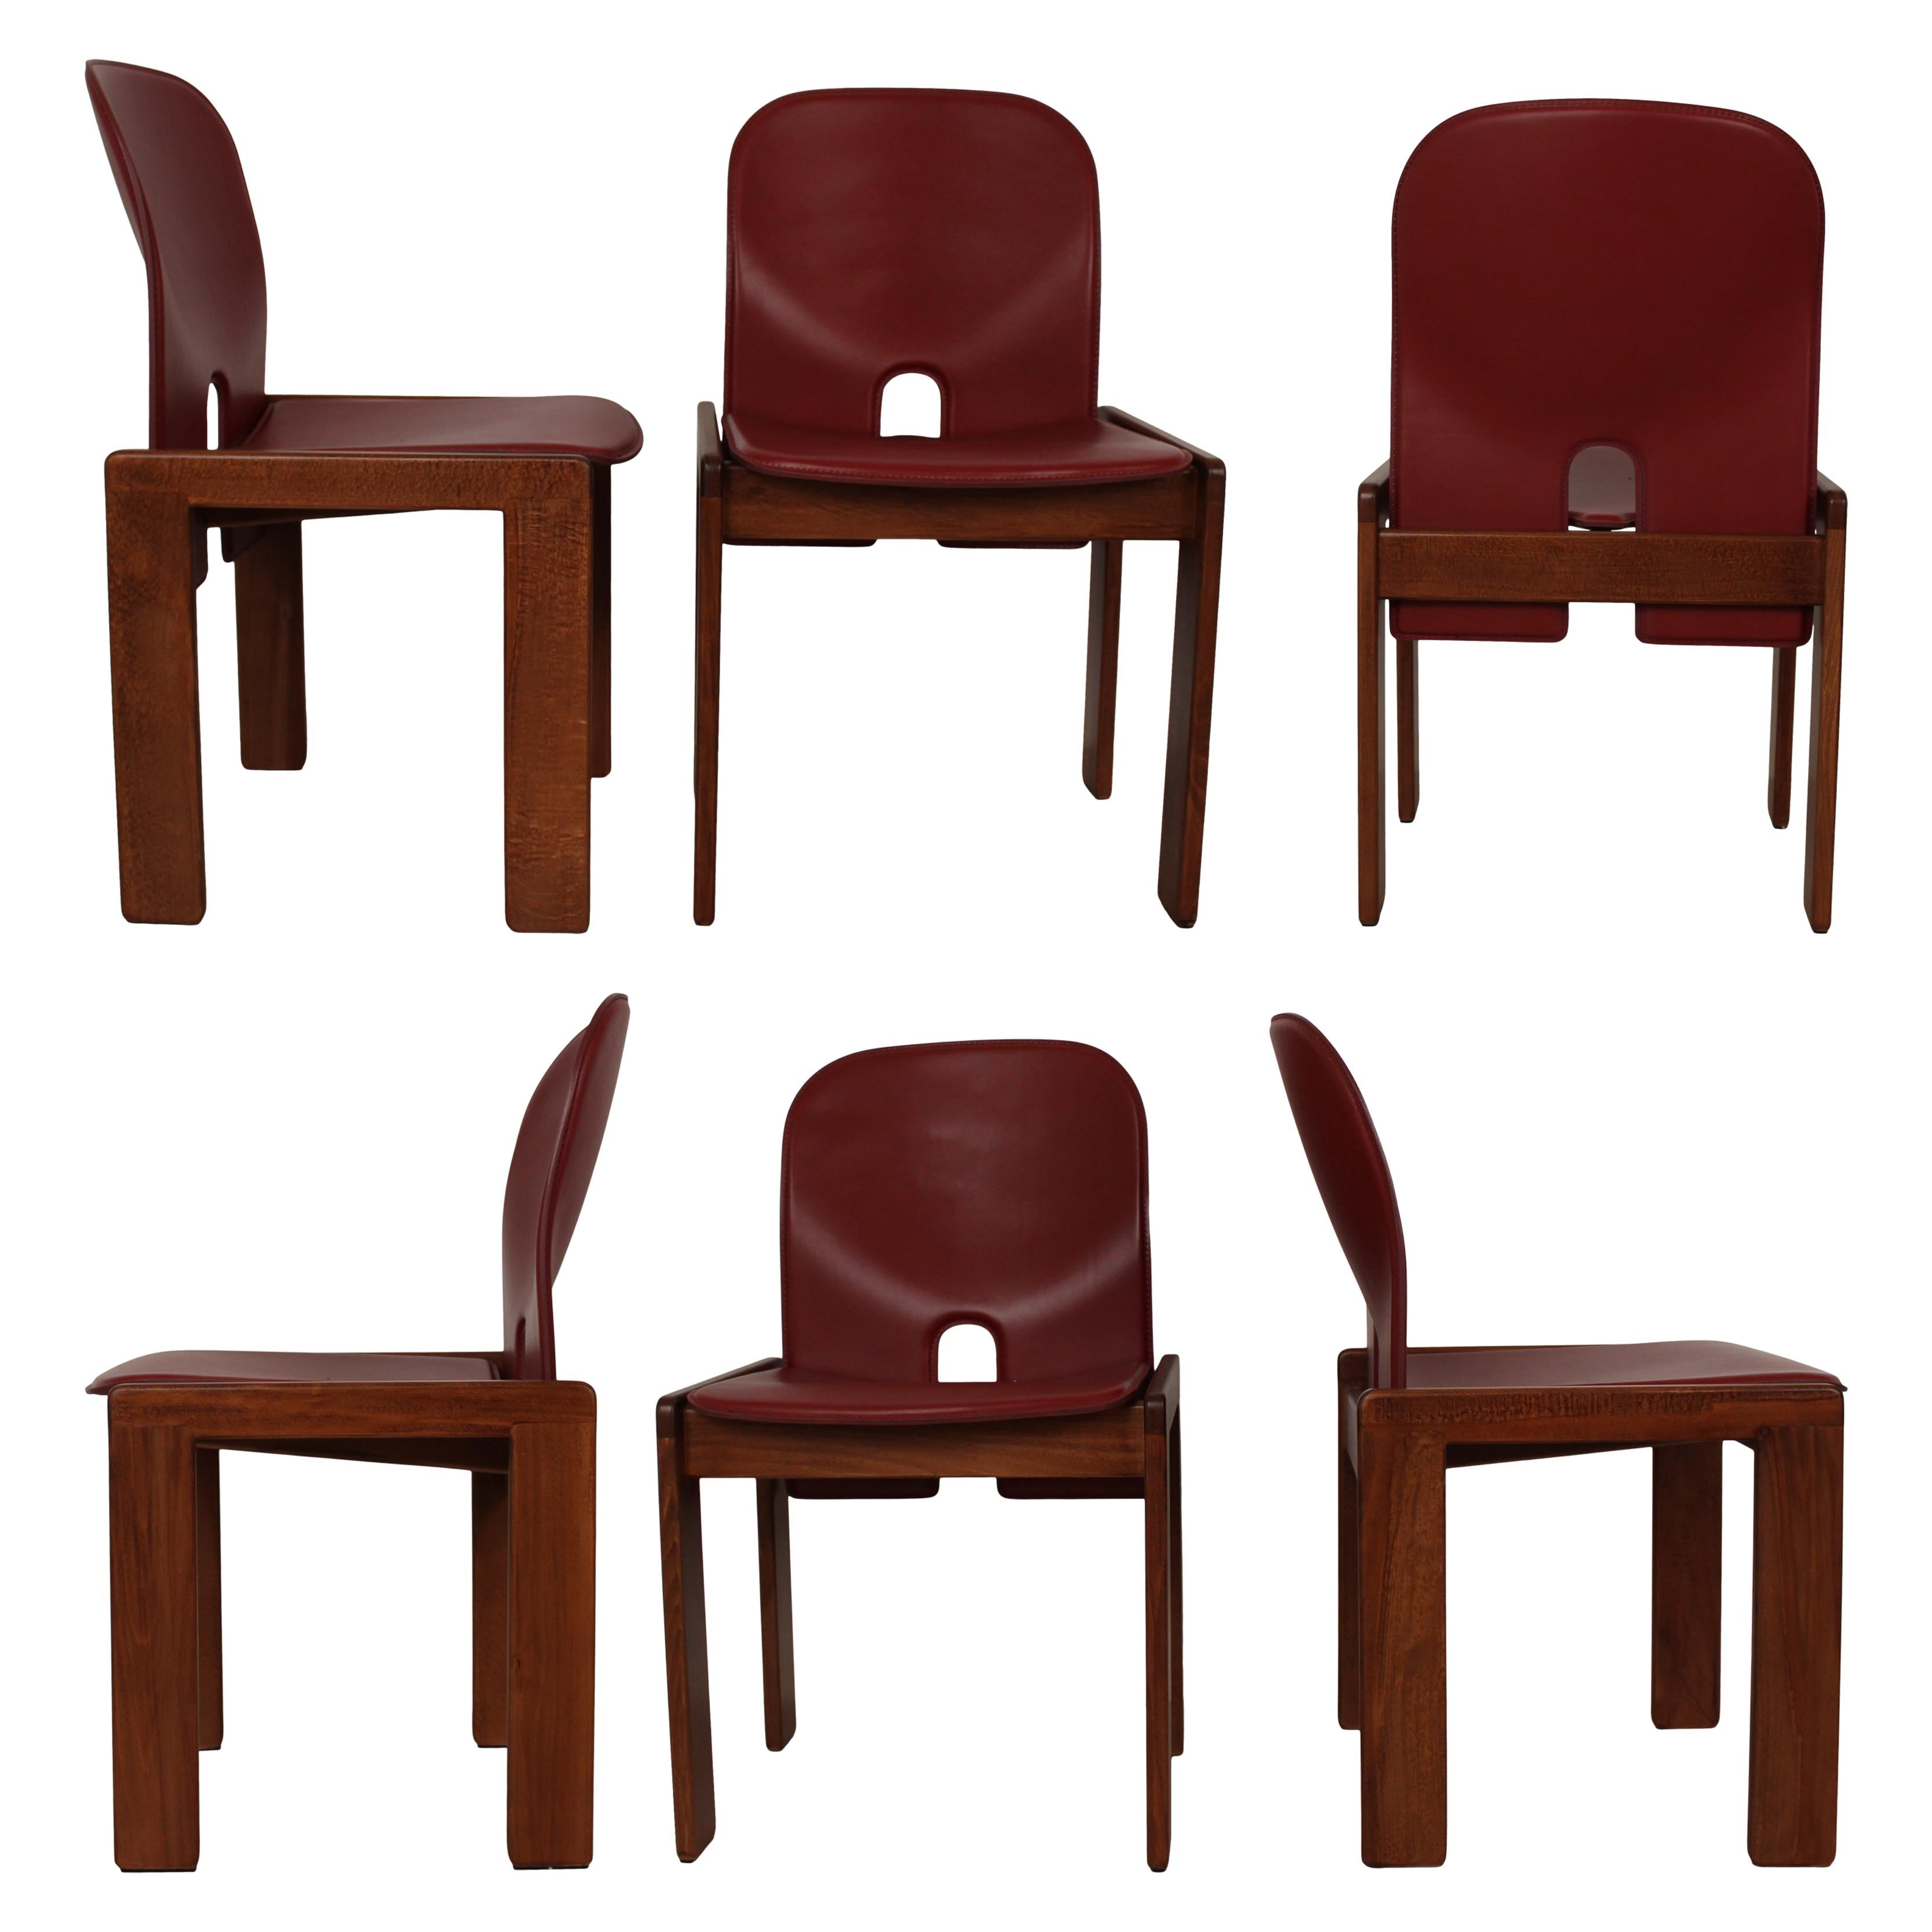 Set of six Model 121 dining chairs, designed by Afra and Tobia Scarpa and produced by the Italian manufacturer Cassina in 1967.
They feature English red leather upholstery and a walnut structure.

Fully restored in Italy.

Afra and Tobia Scarpa